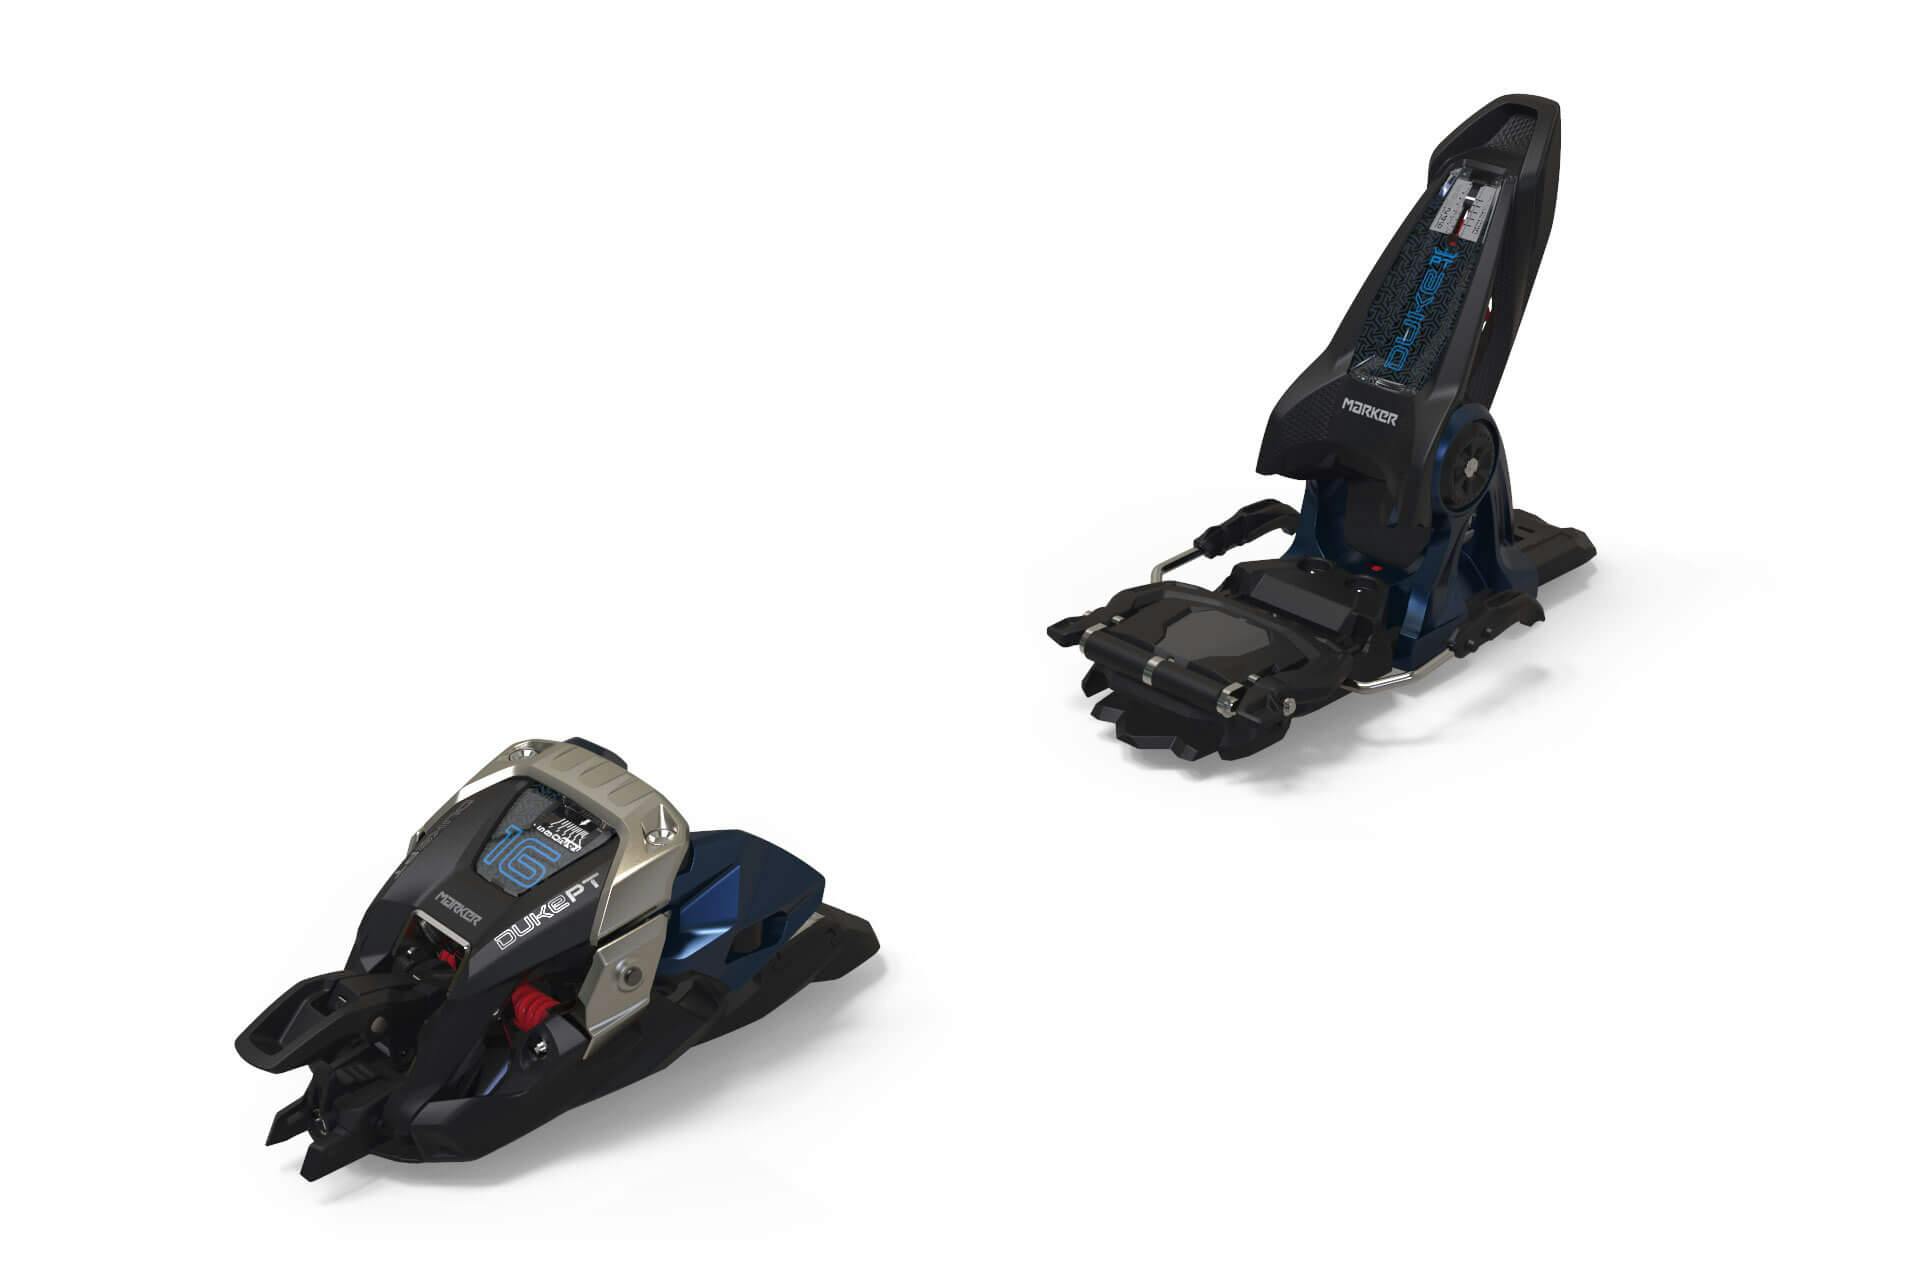 A pair of ski bindings with the label Duke PT